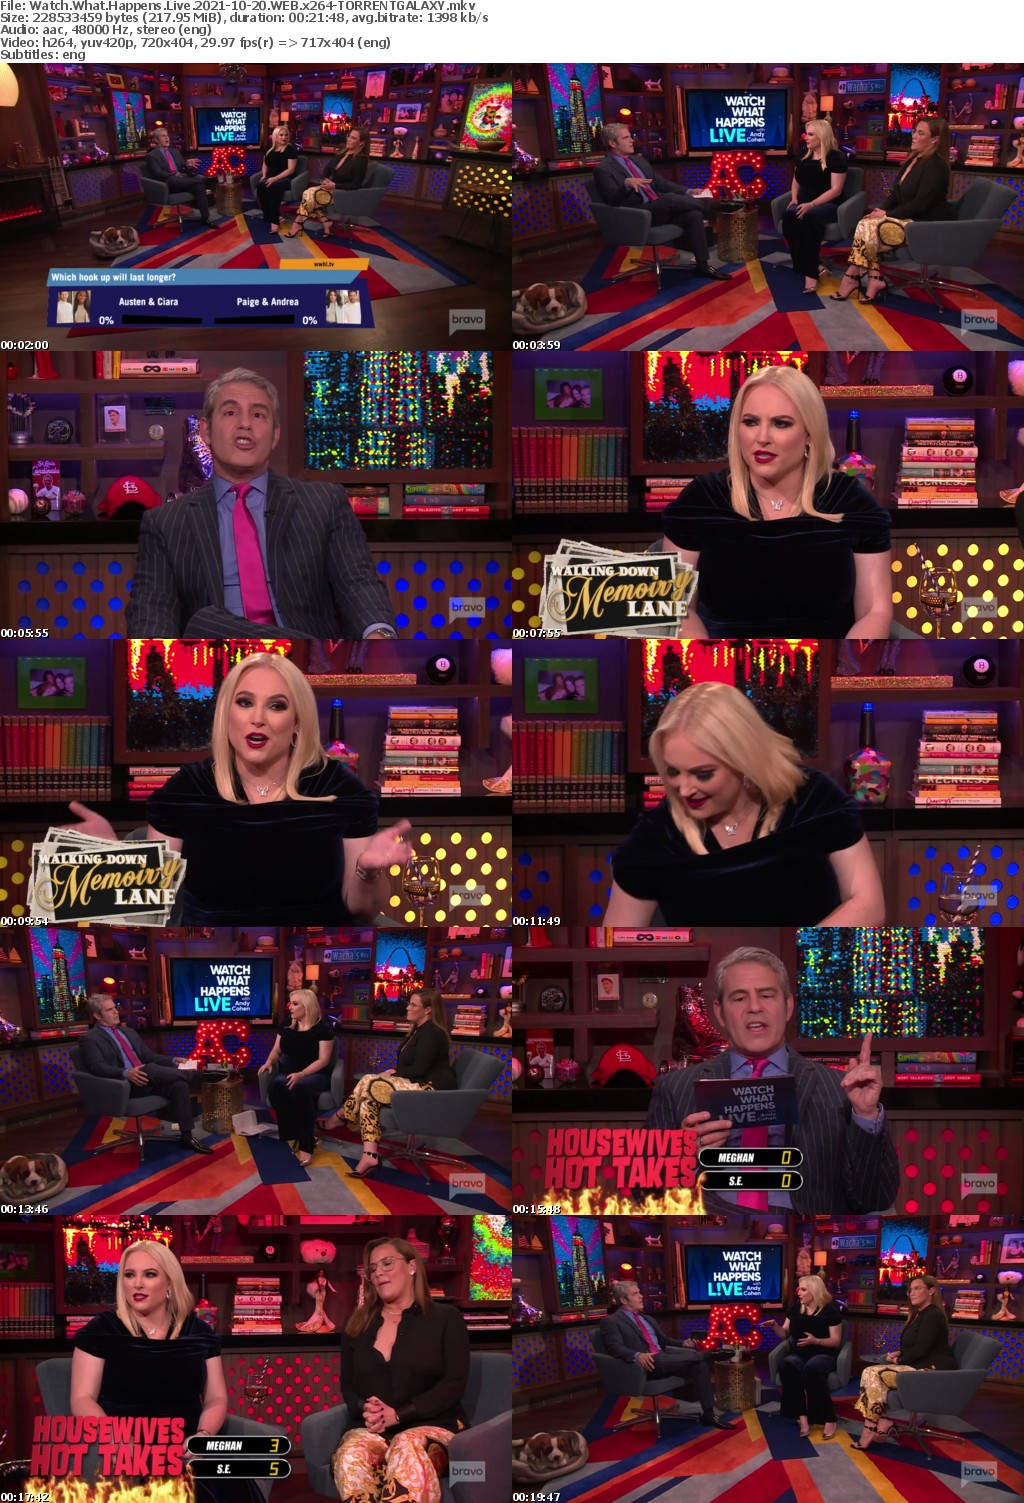 Watch What Happens Live 2021-10-20 WEB x264-GALAXY